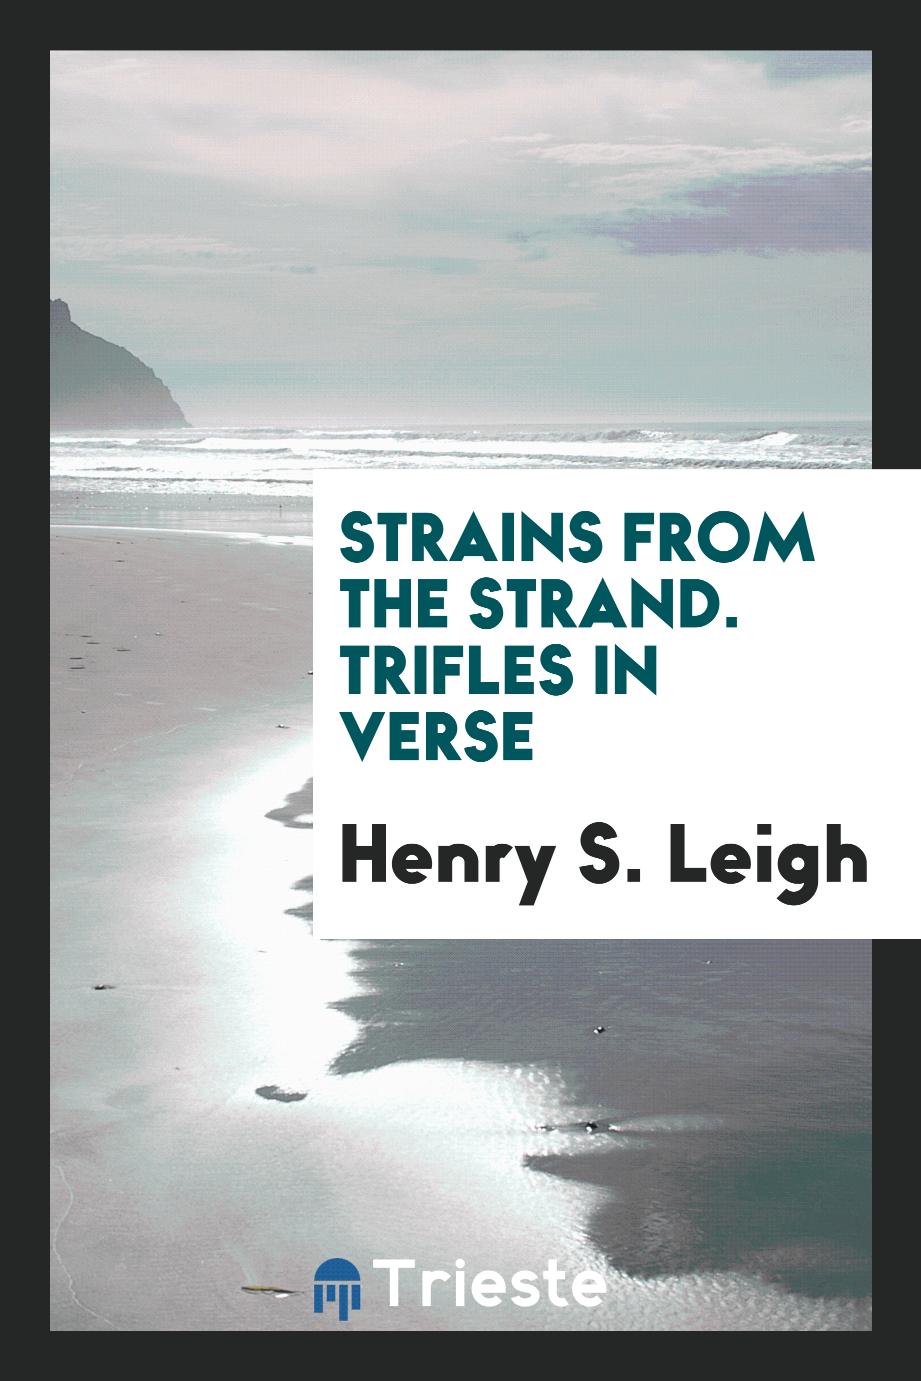 Strains from the Strand. Trifles in verse